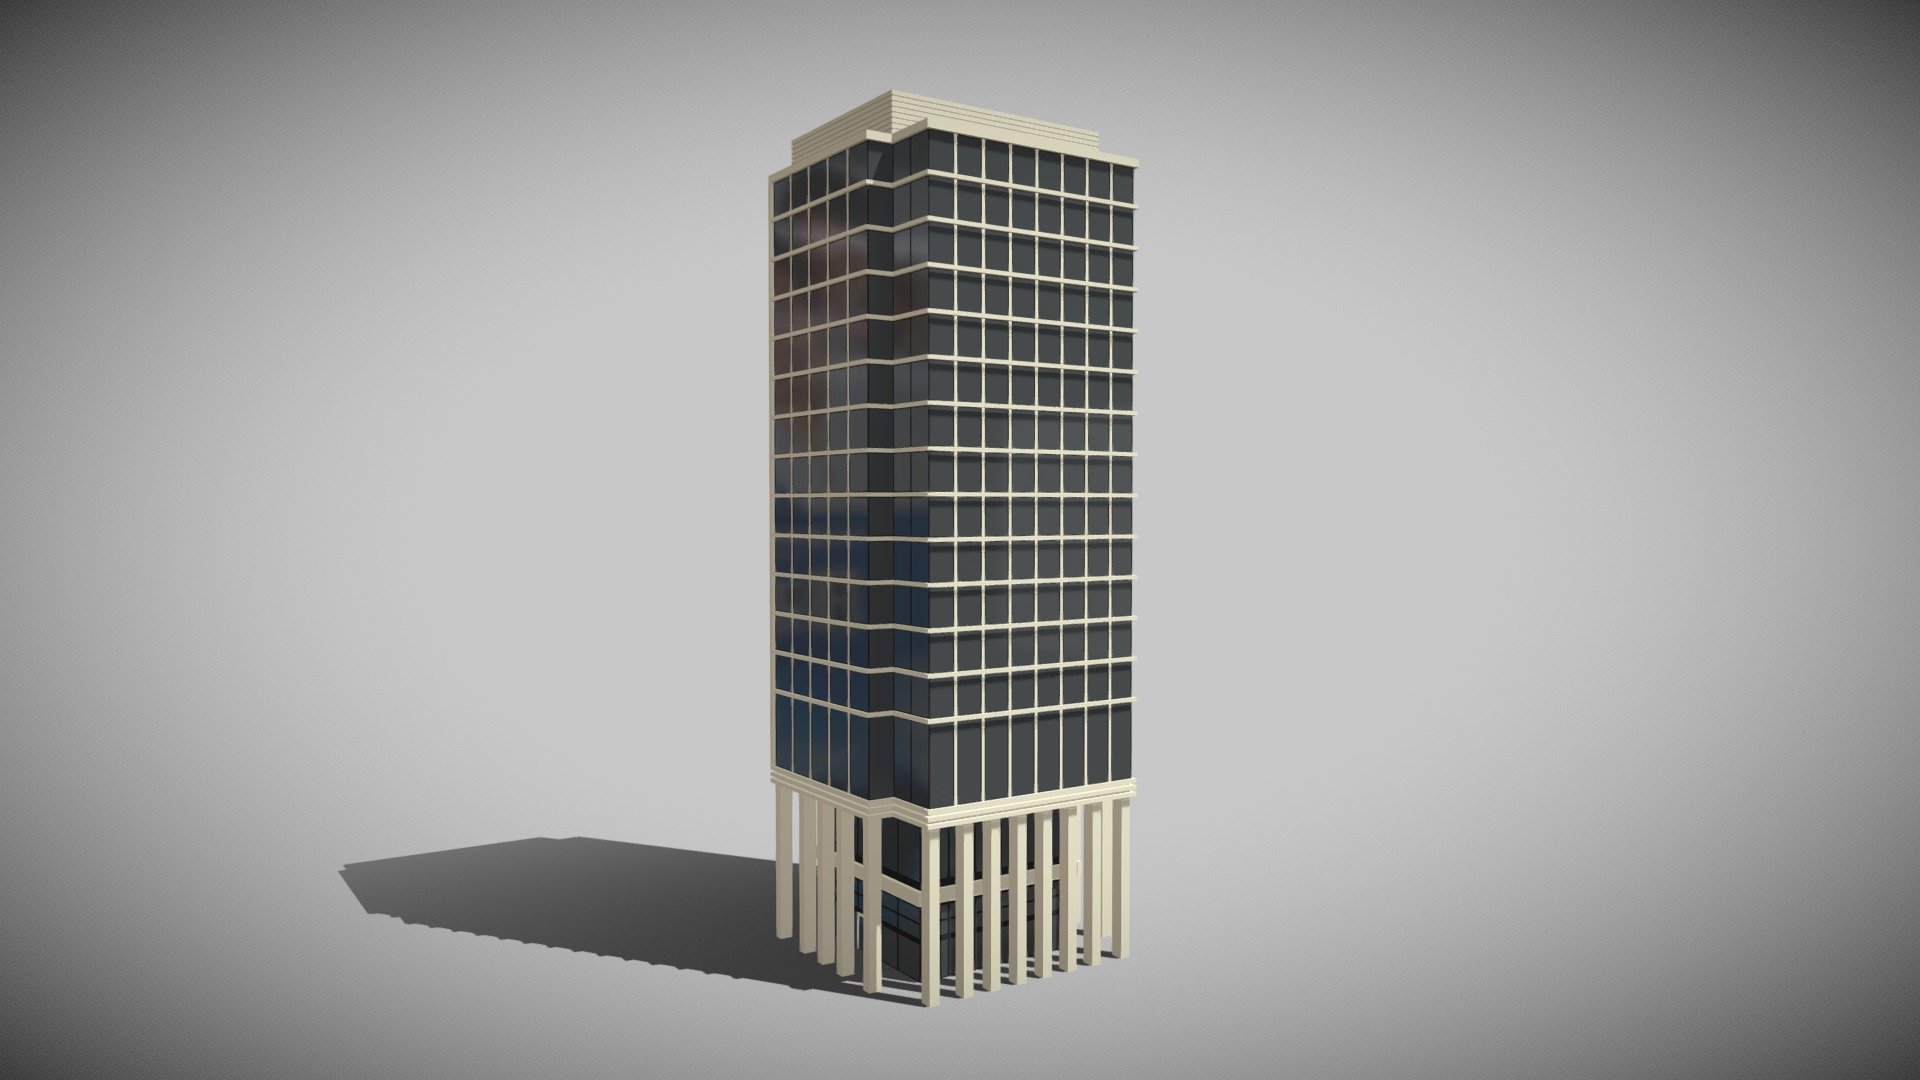 Detailed model of a Commercial Building with no interior, modeled in Cinema 4D.The model was created using approximate real world dimensions.

The model has 12,687 polys and 15,161 vertices.

An additional file has been provided containing the original Cinema 4D project files and other 3d export files such as 3ds, fbx and obj 3d model